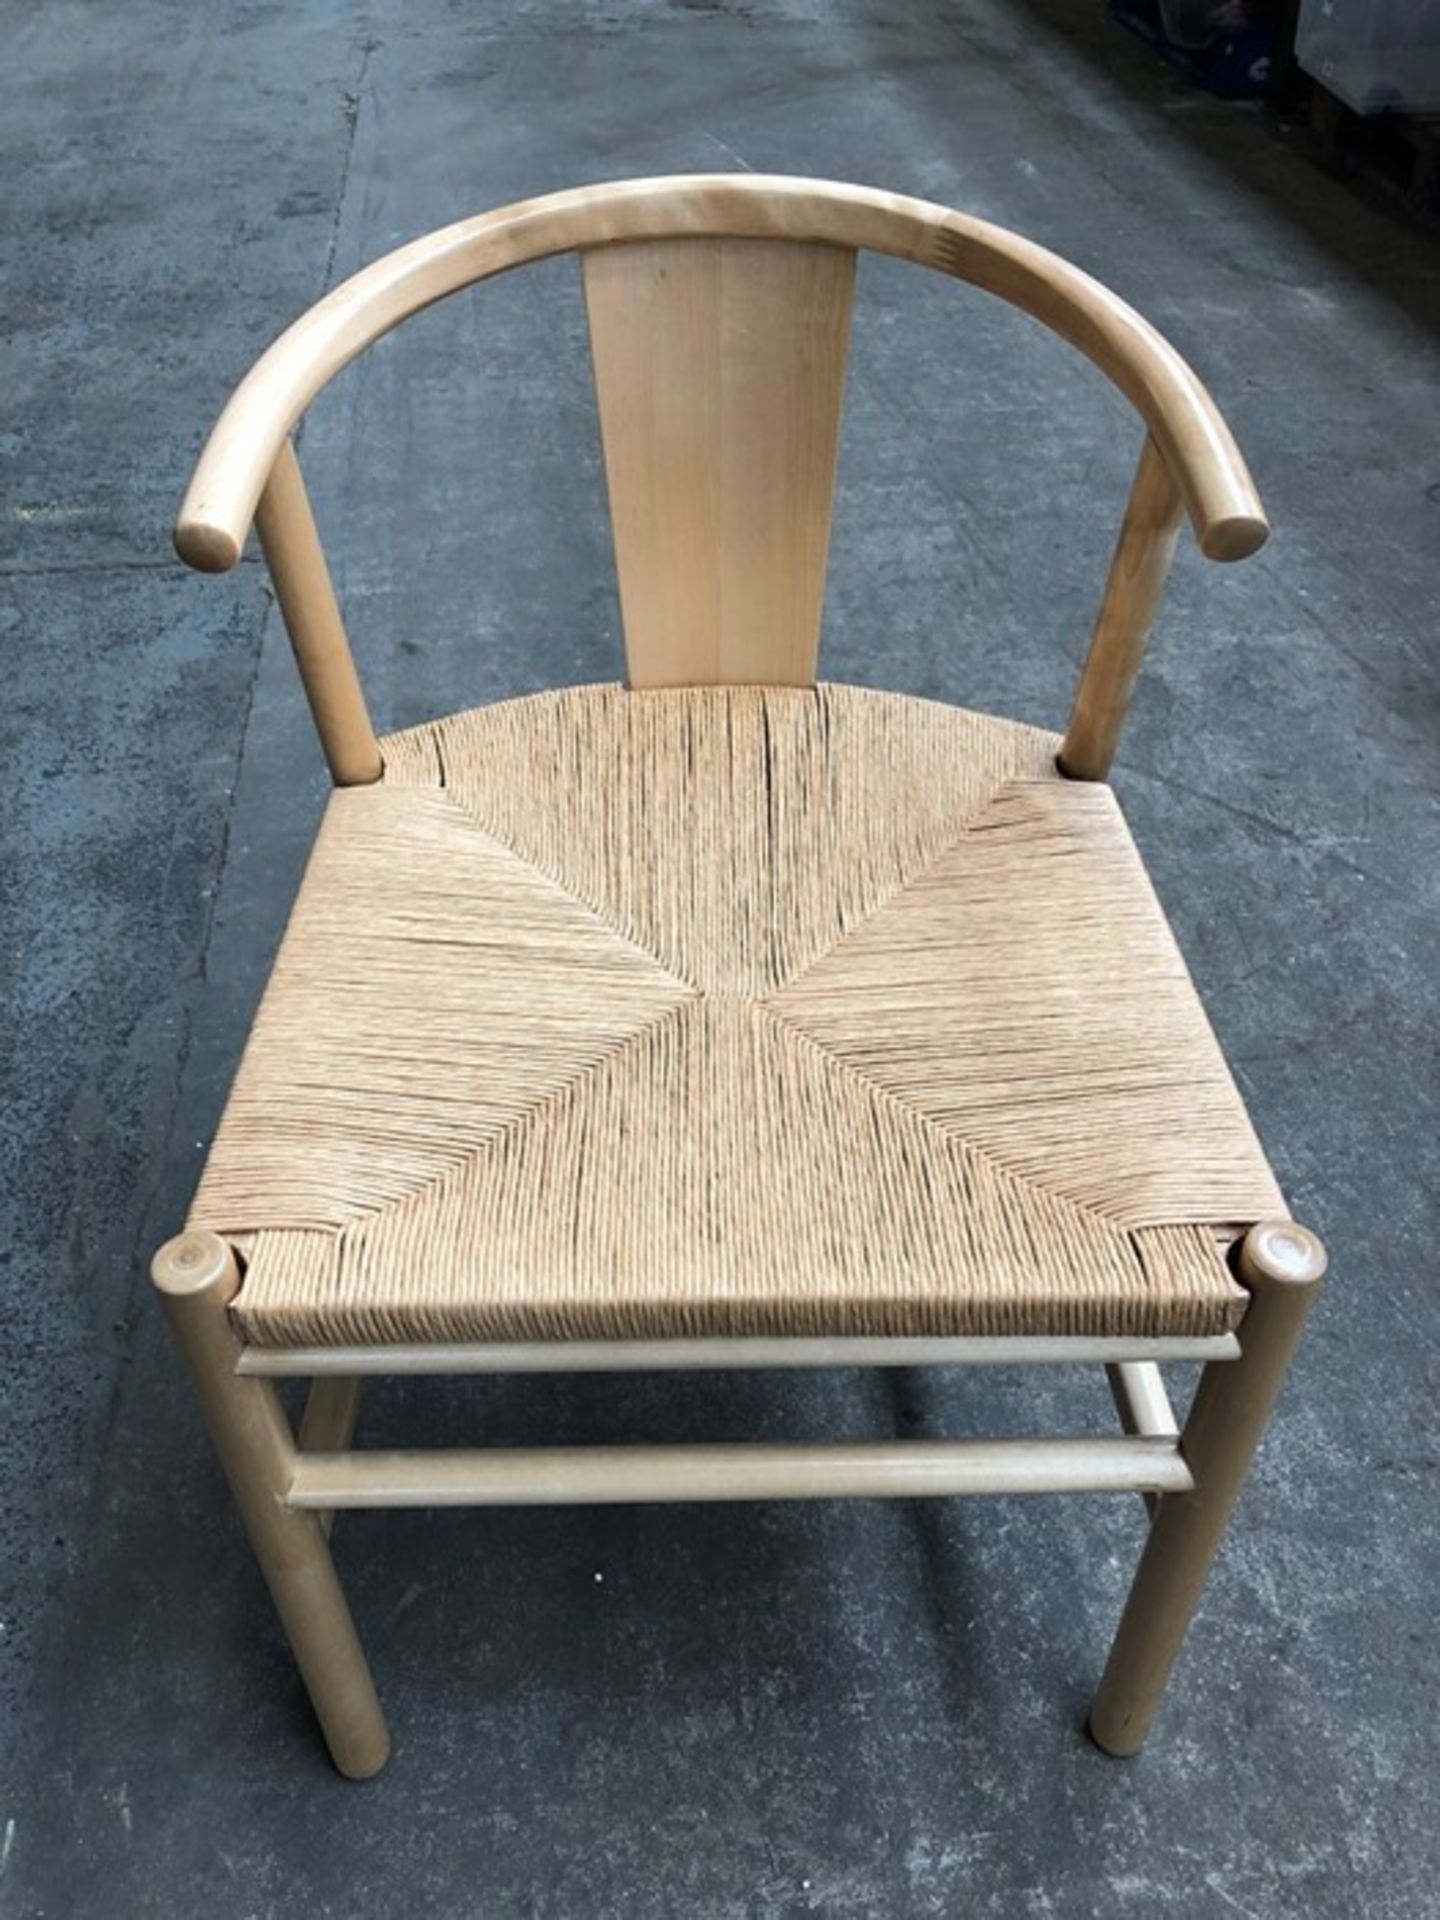 LA REDOUTE KIRSTI SCANDI-STYLE BIRCH CHAIR WITH WOVEN SEAT - Image 3 of 3